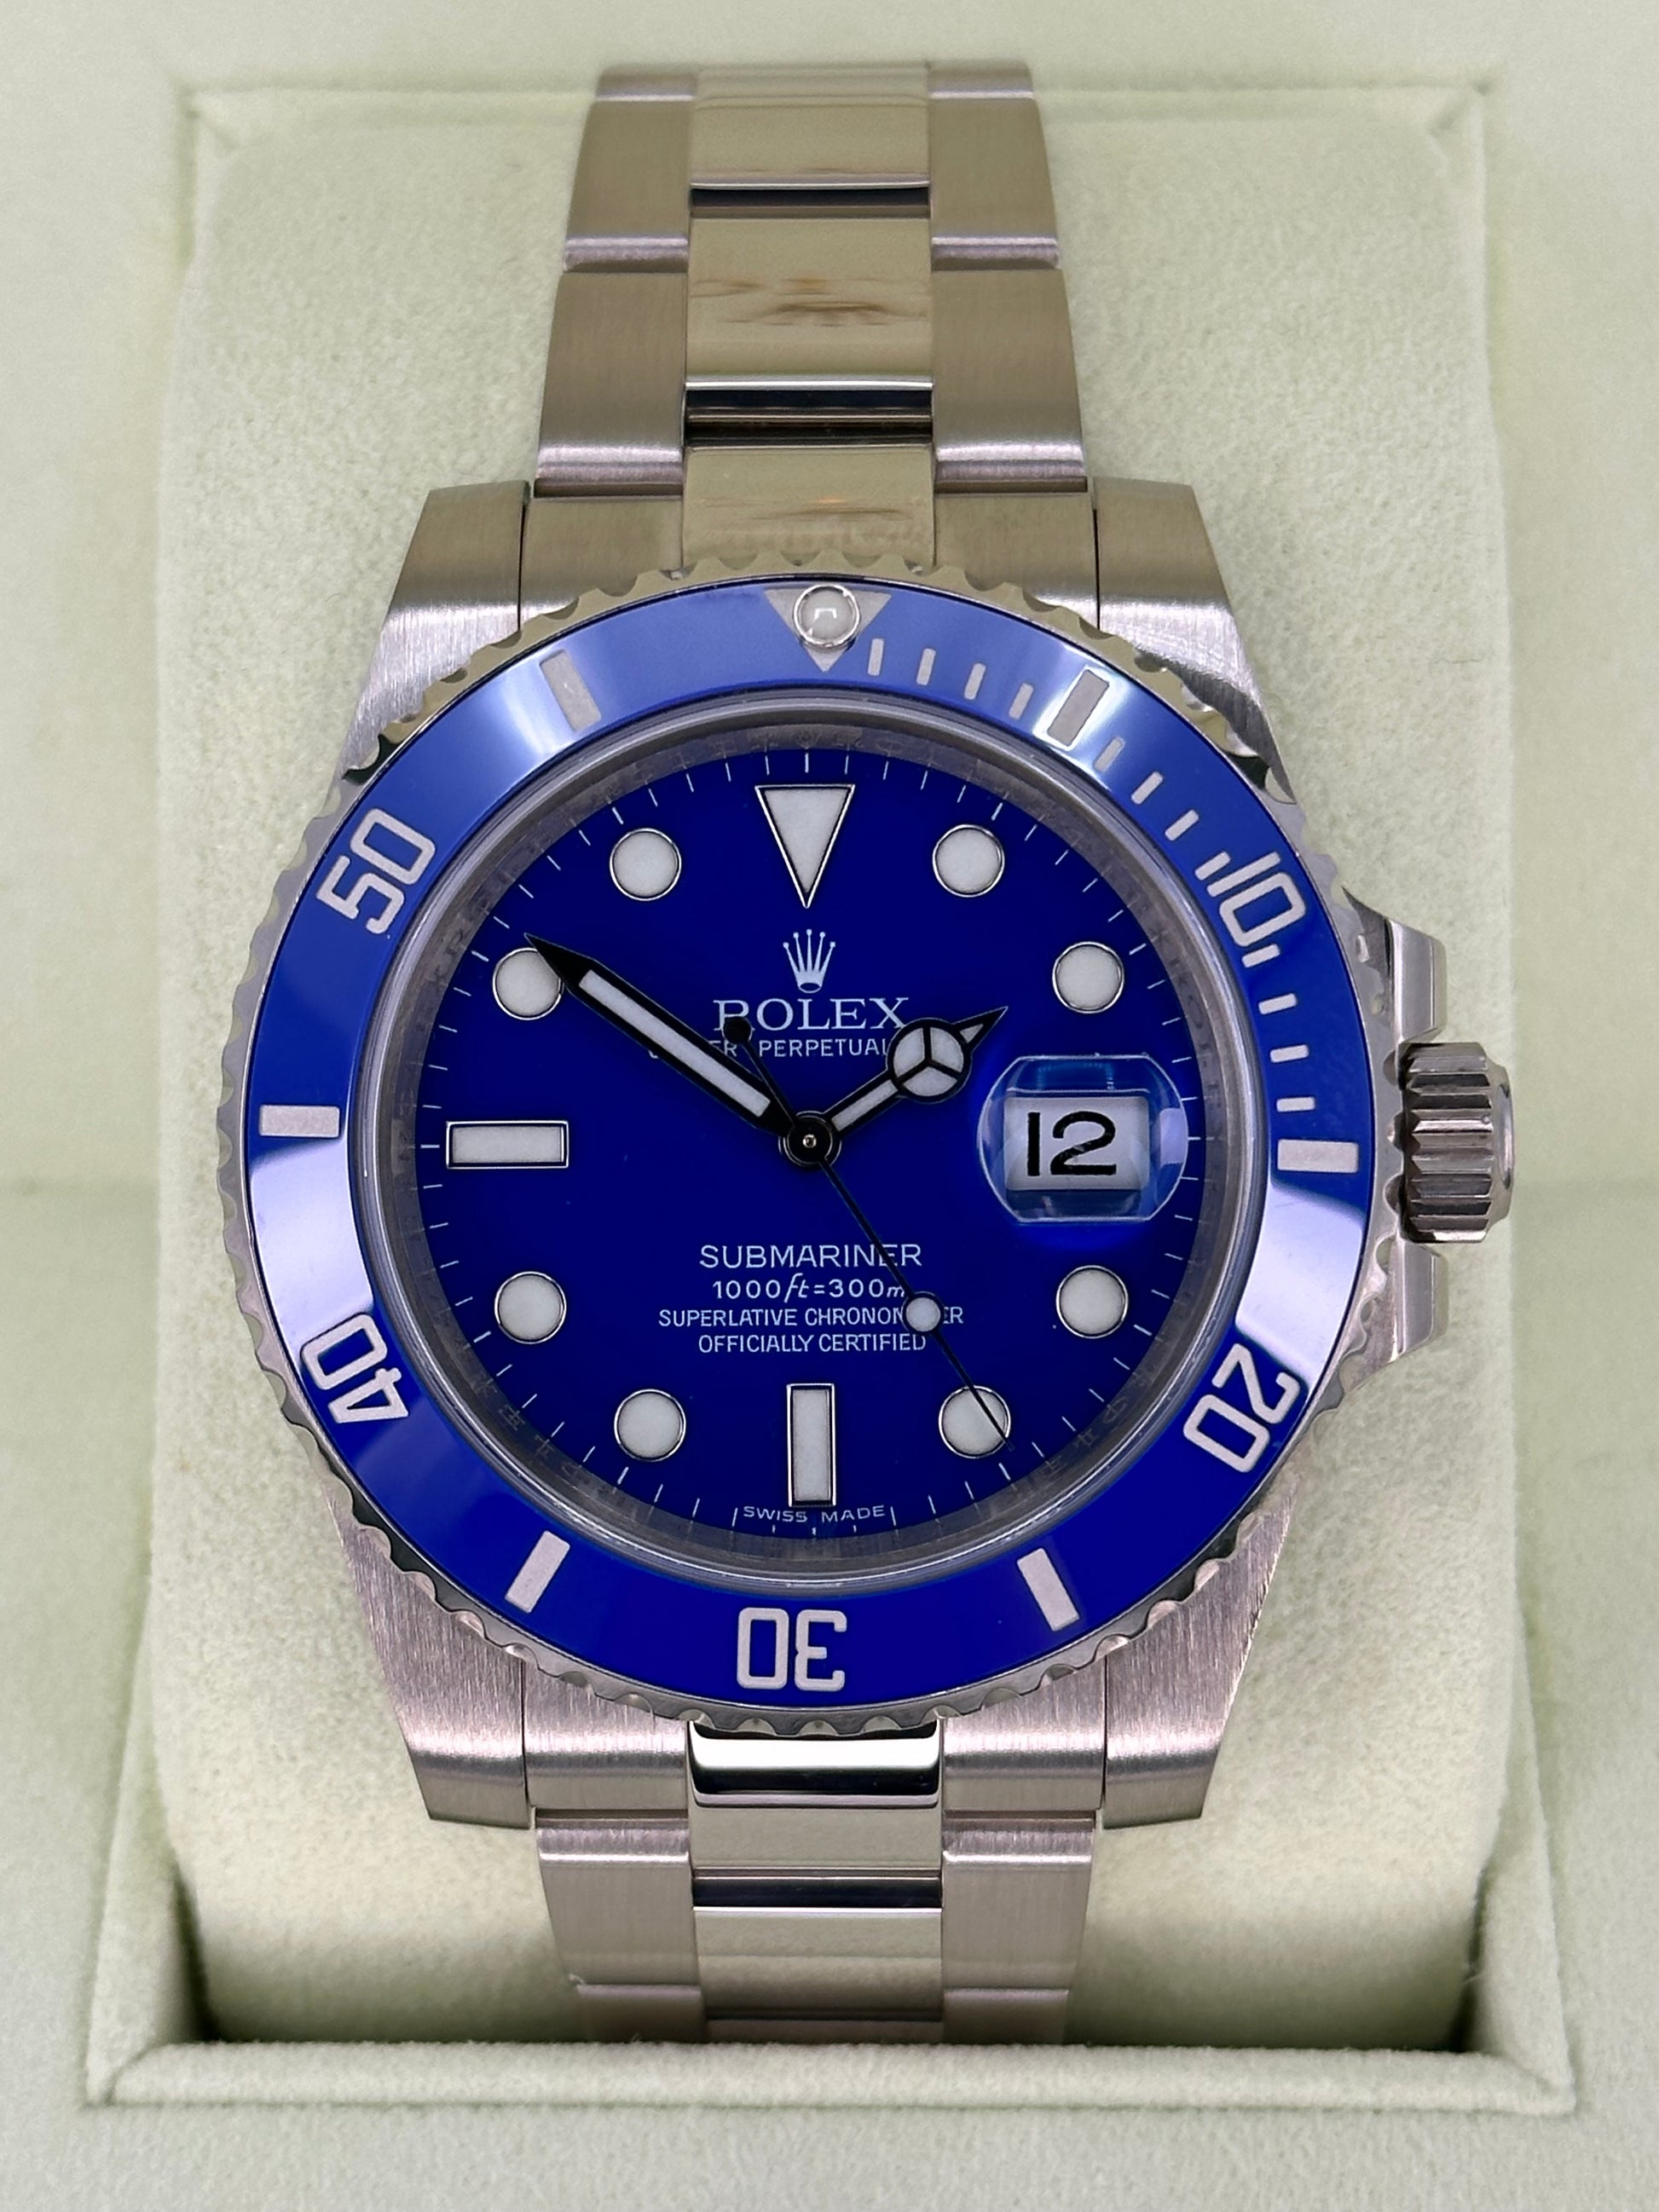 2009 Rolex Submariner Date “Smurf” 40mm 116619LB White Gold Blue Dial - MyWatchLLC